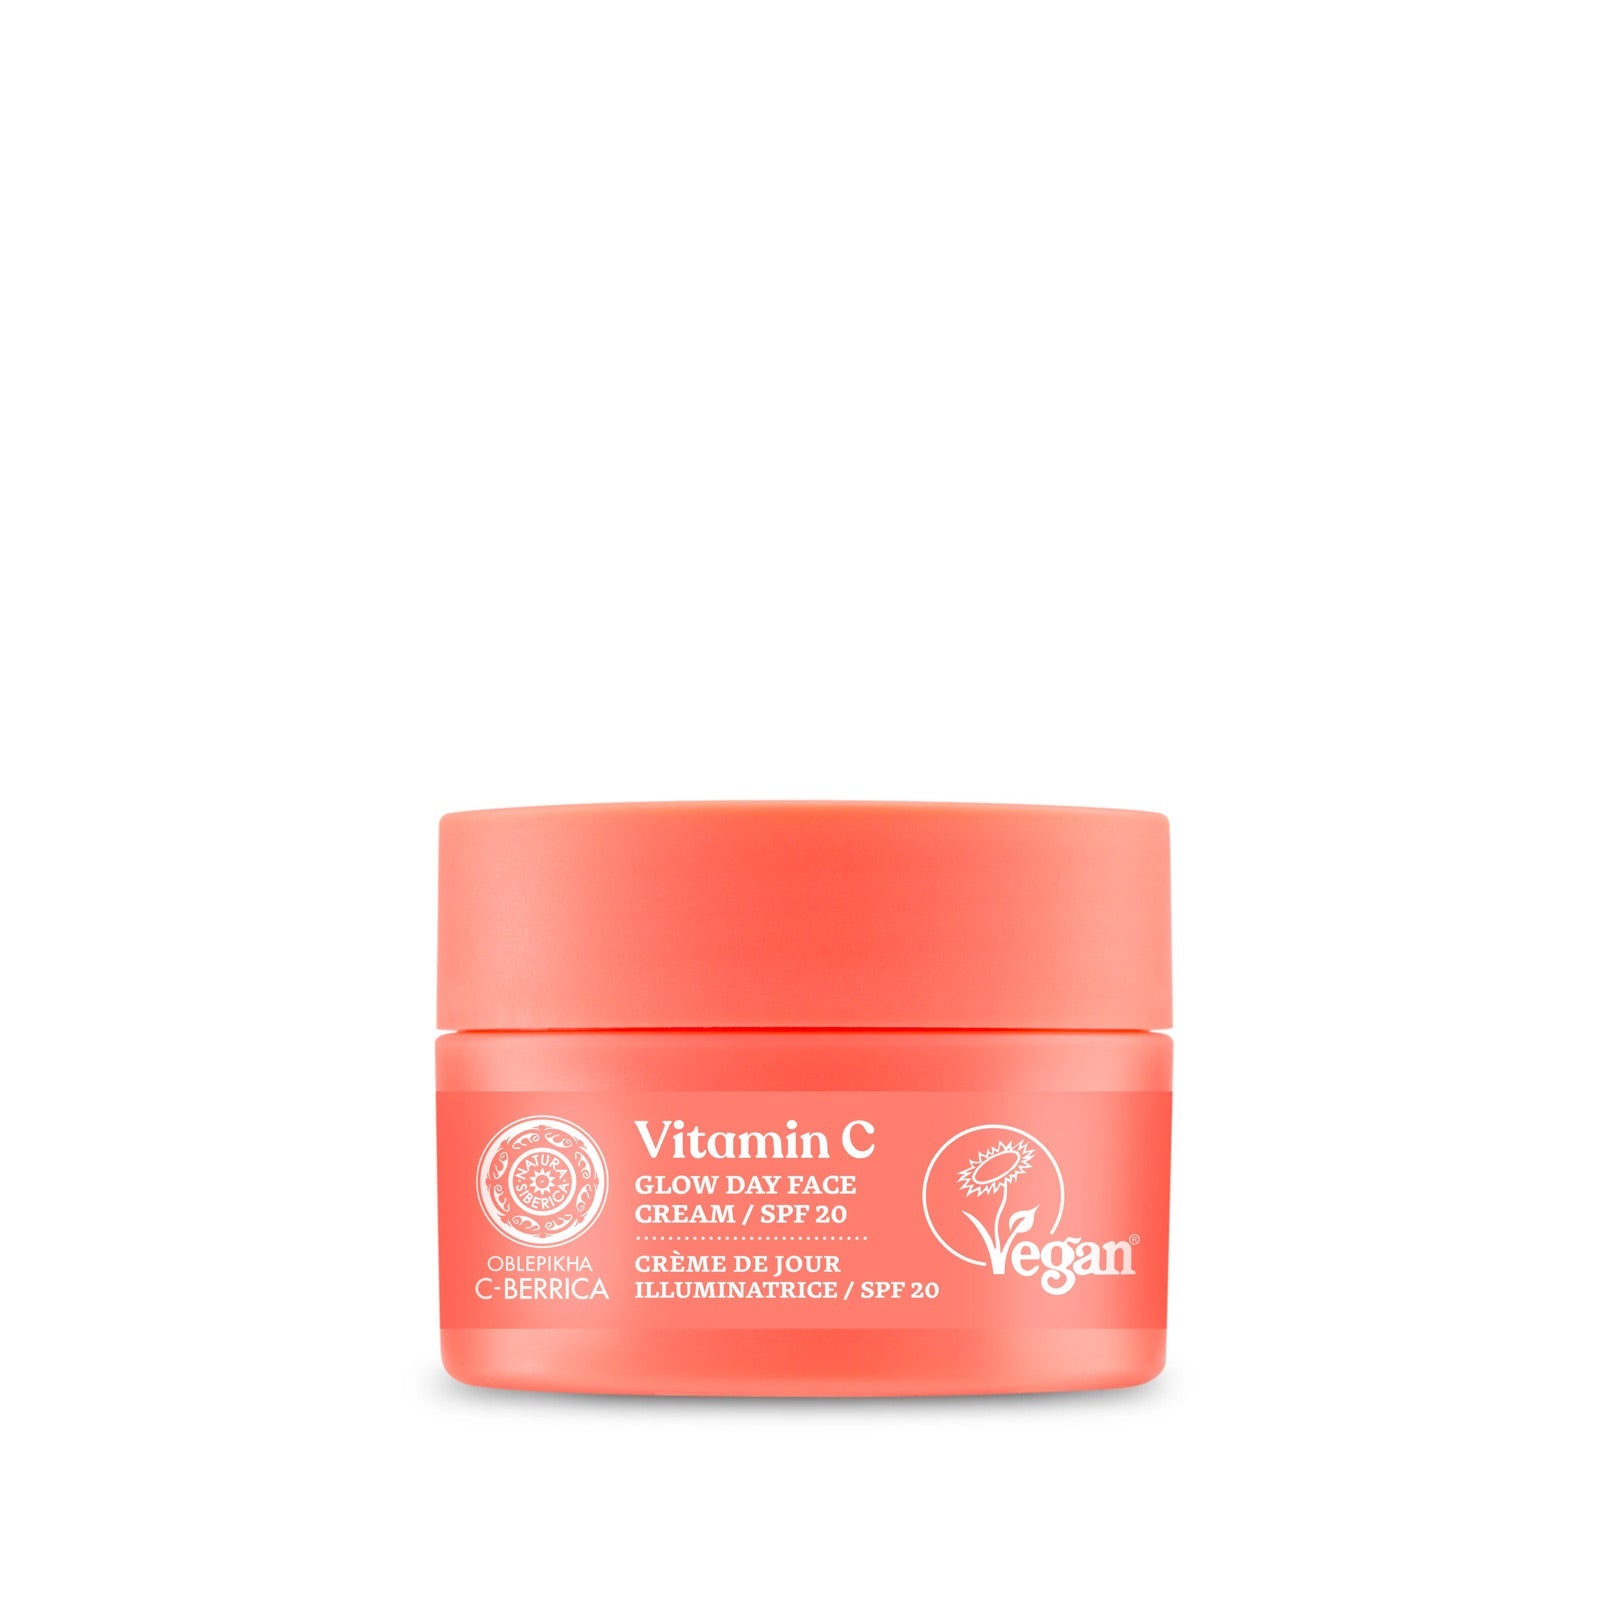 C-Berrica Glow Day Face Cream with SPF20, 50 ml - FREE GIFT